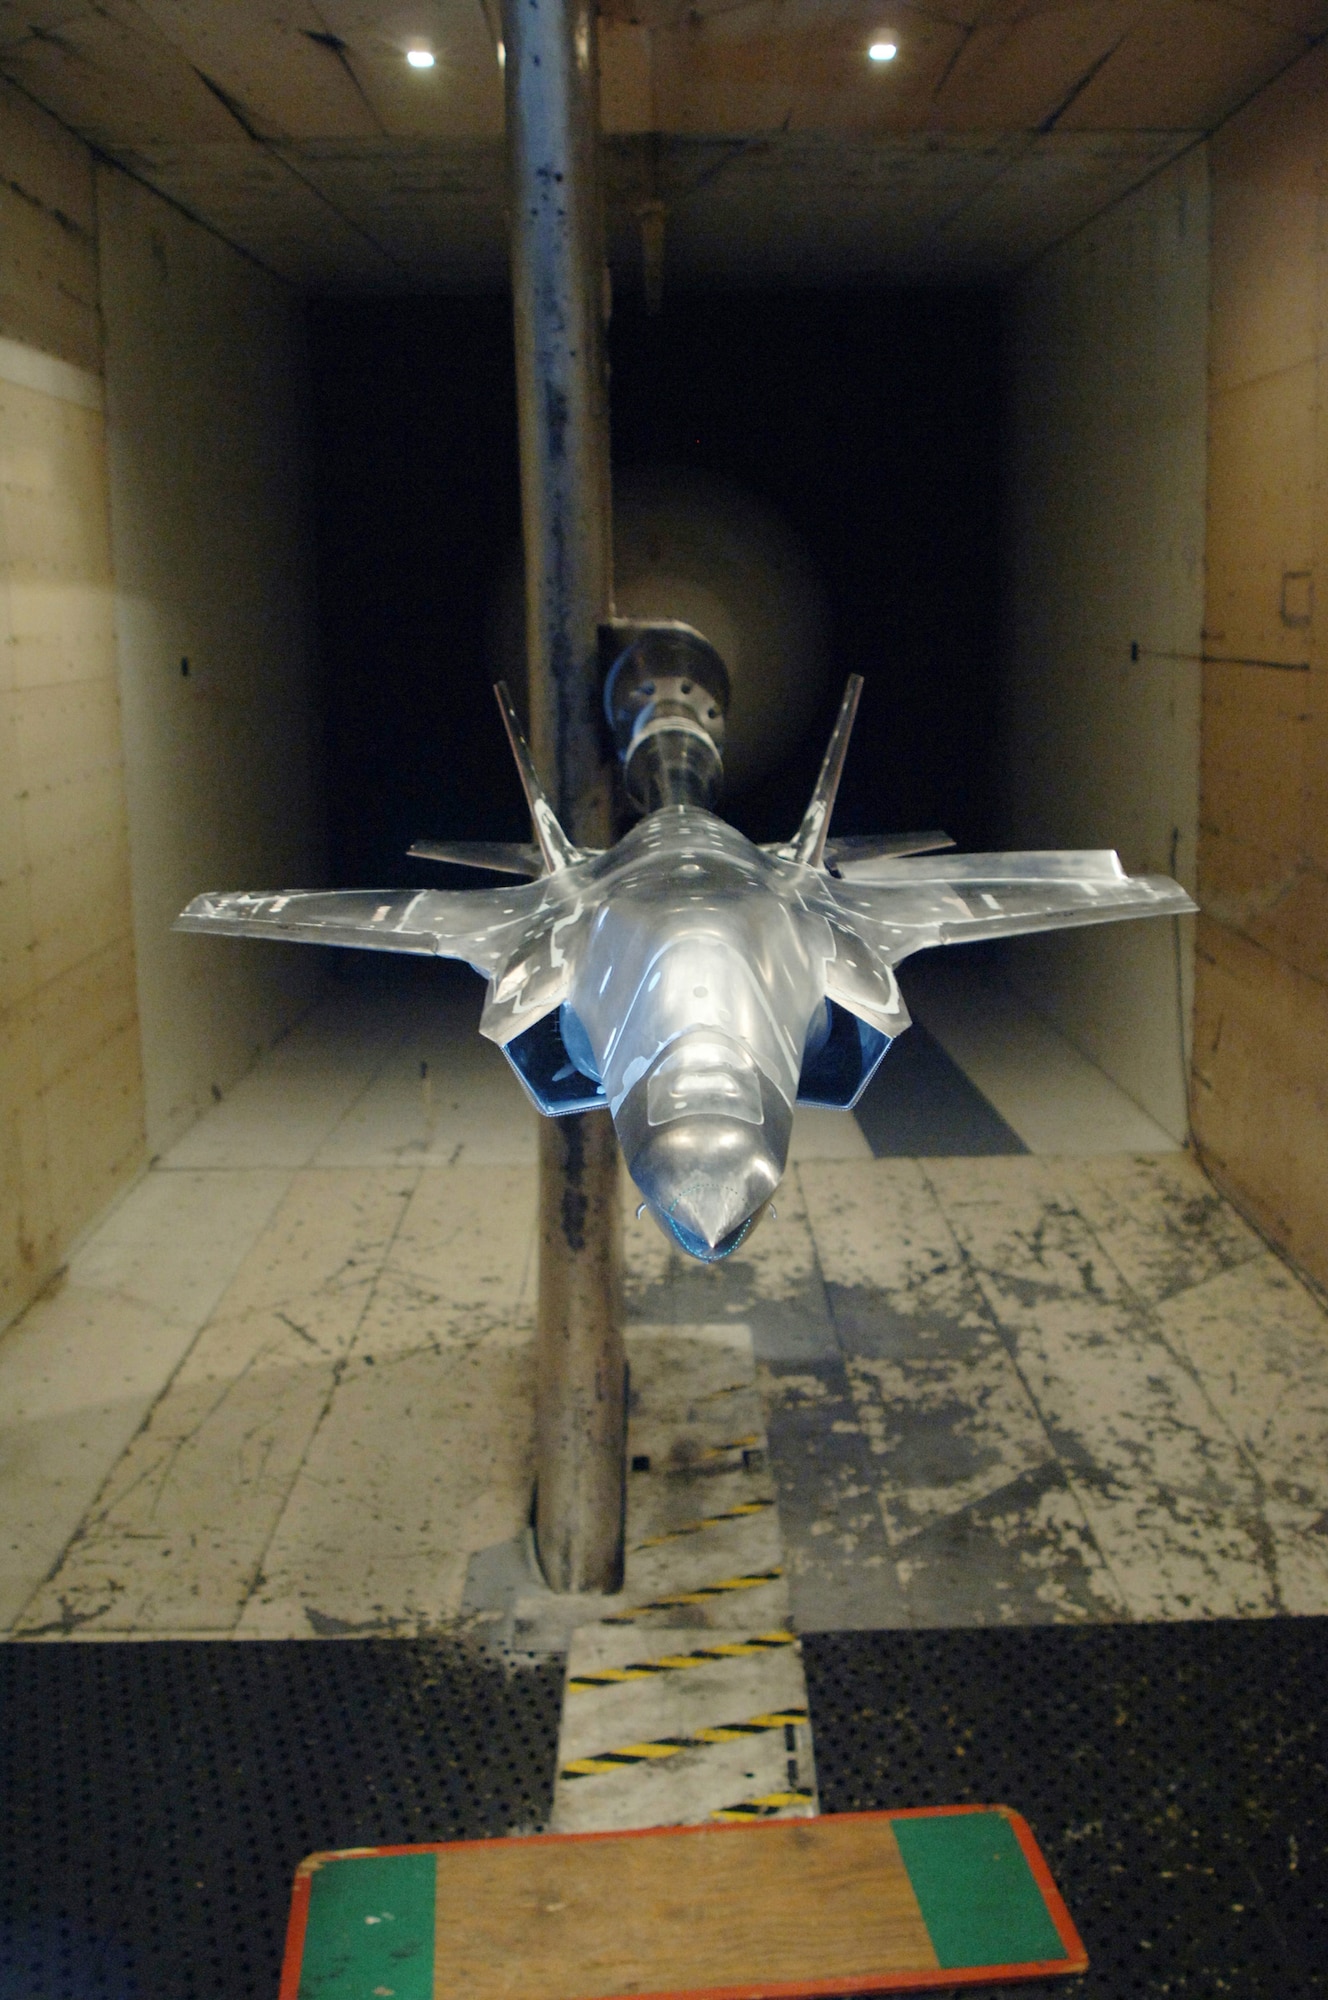 A 12-percent model of the Short Takeoff/Vertical Landing (STOVL) version of the F-35 Lightning II is undergoing aerodynamic loads testing in AEDC’s 16-foot transonic wind tunnel. The information from this testing, the final entry in a series of tests, will go into a large database to refine and validate the aircraft designs for flight testing and ultimately, production of the CTOL and STOVL variants.